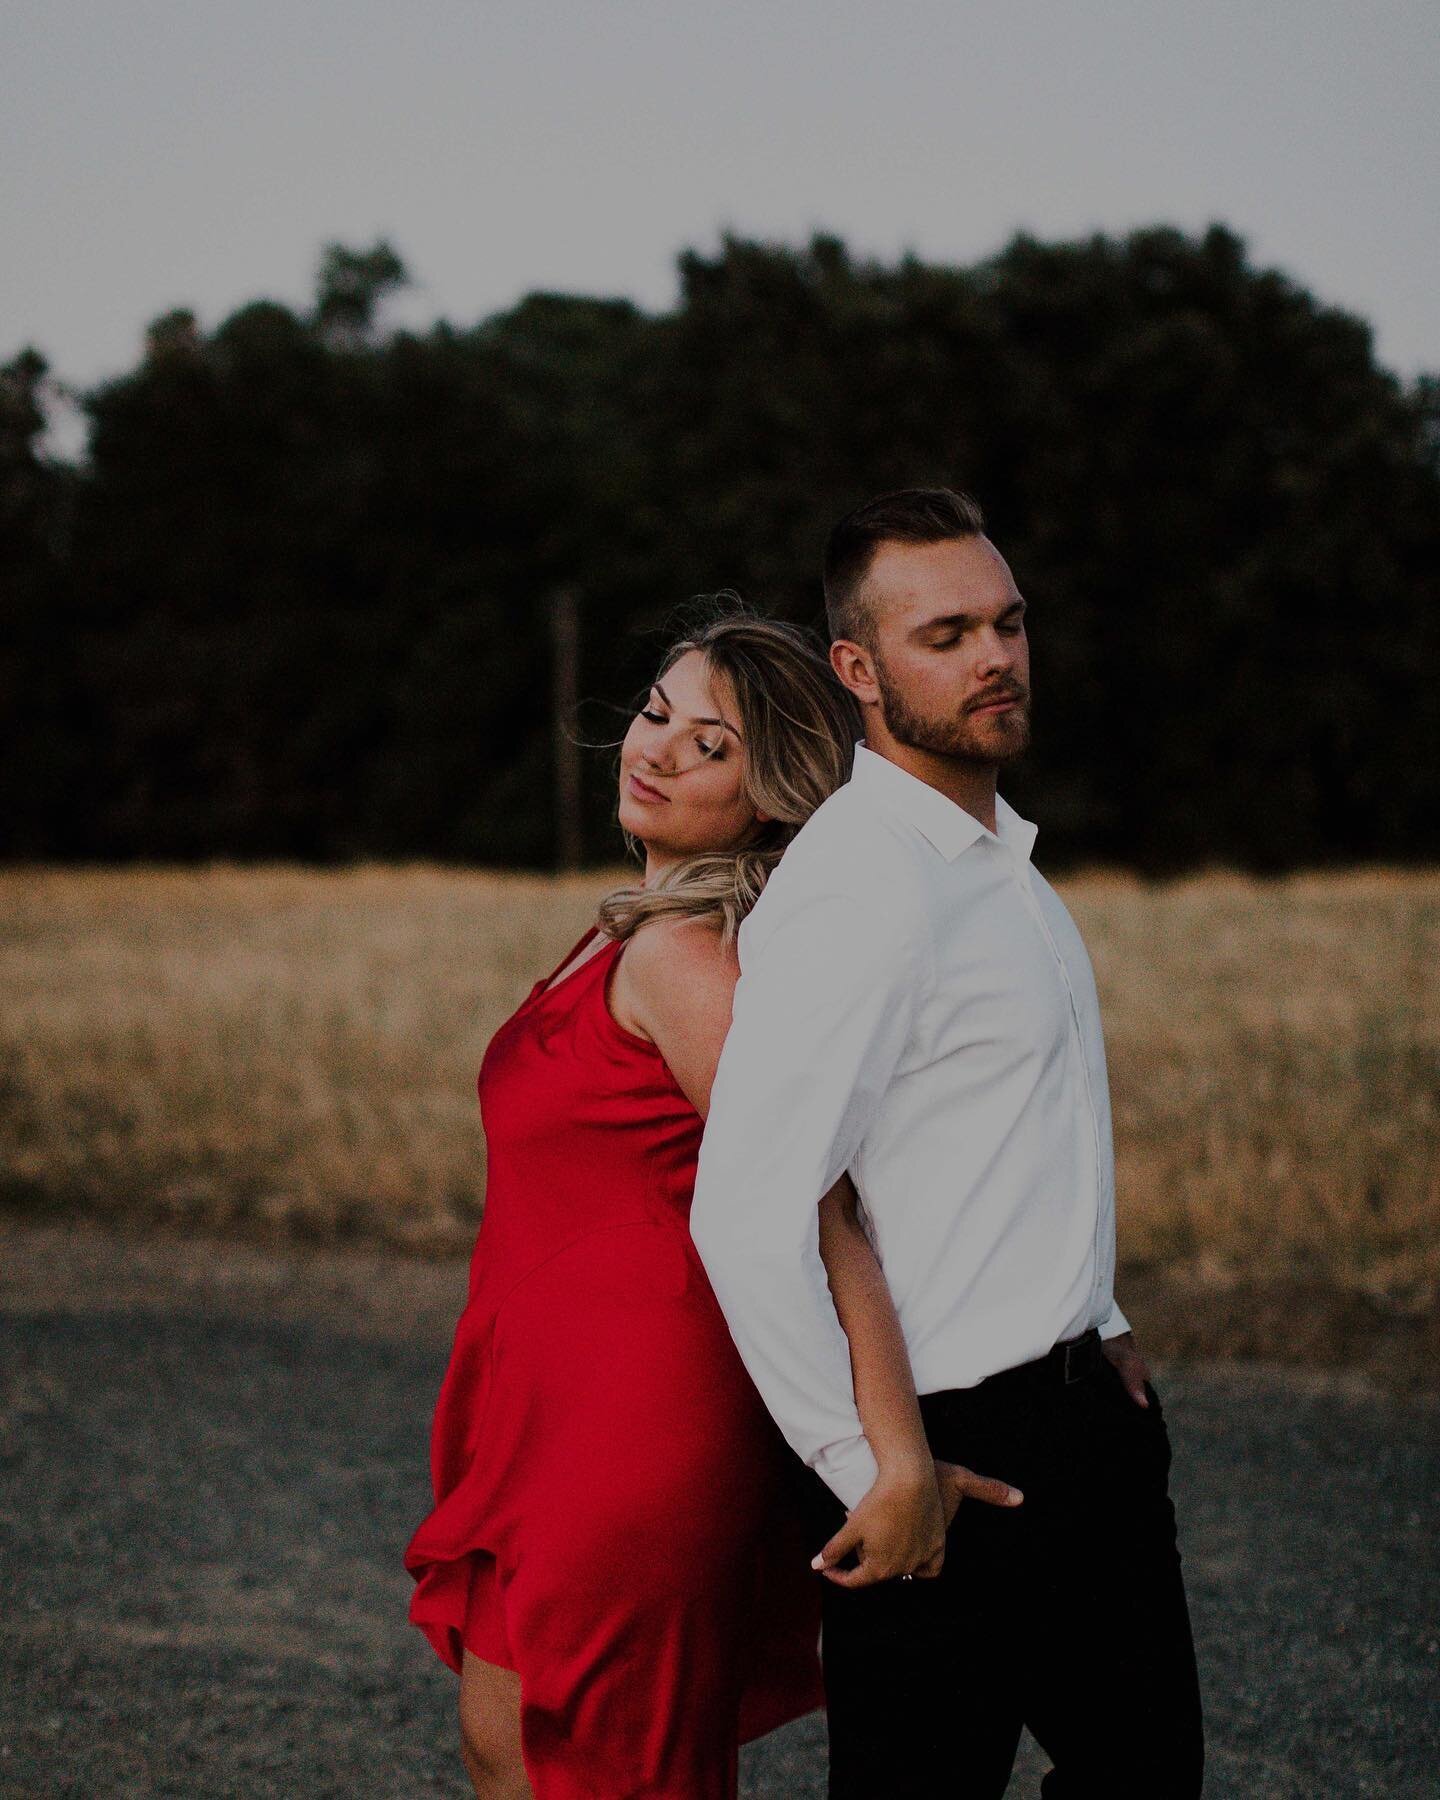 What a year, month, week it has been for this world, our country, this town. Today, on their 10 year anniversary, I  planned to photograph Brooke and Zach's wedding, but the fires raging in Vacaville and beyond have changed all plans. I am so gratefu